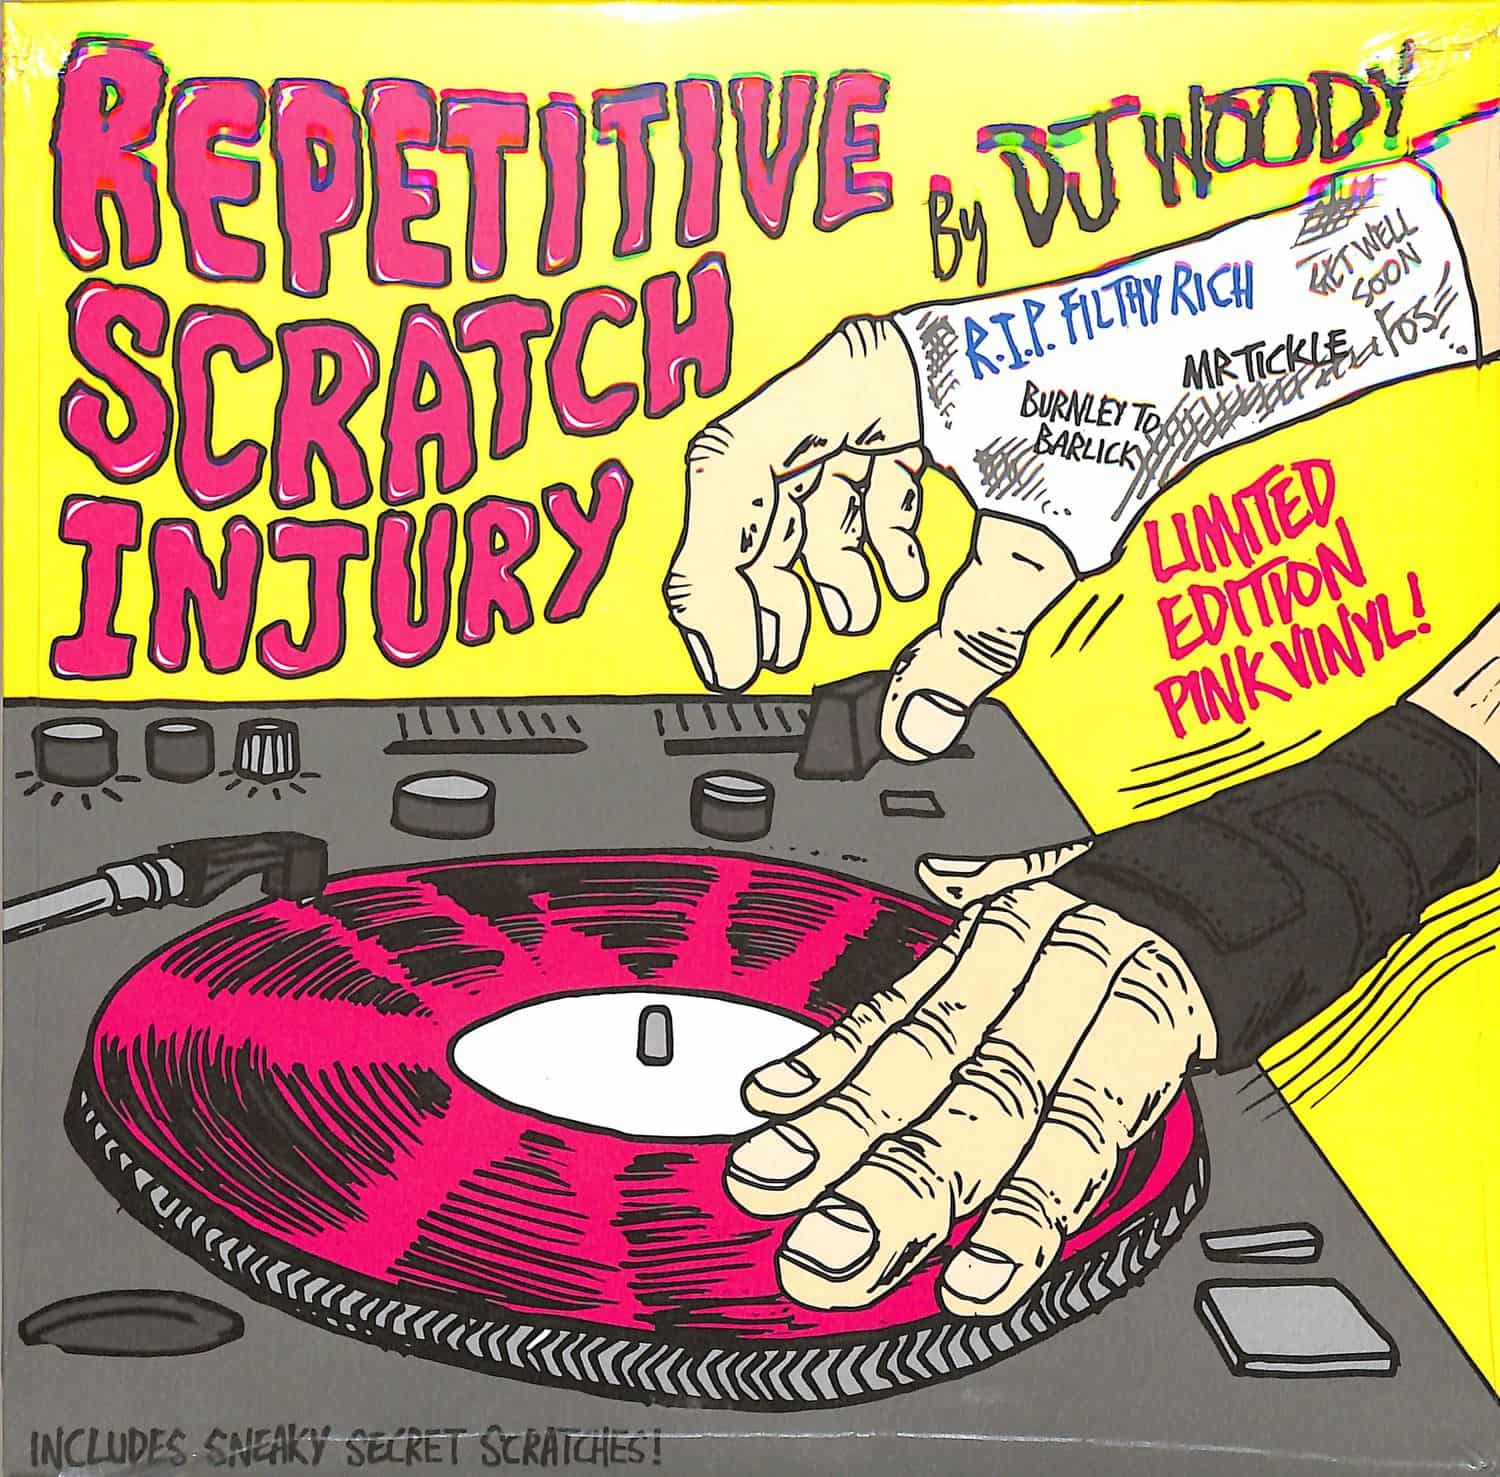 DJ Woody - REPETITIVE SCRATCH INJURY 